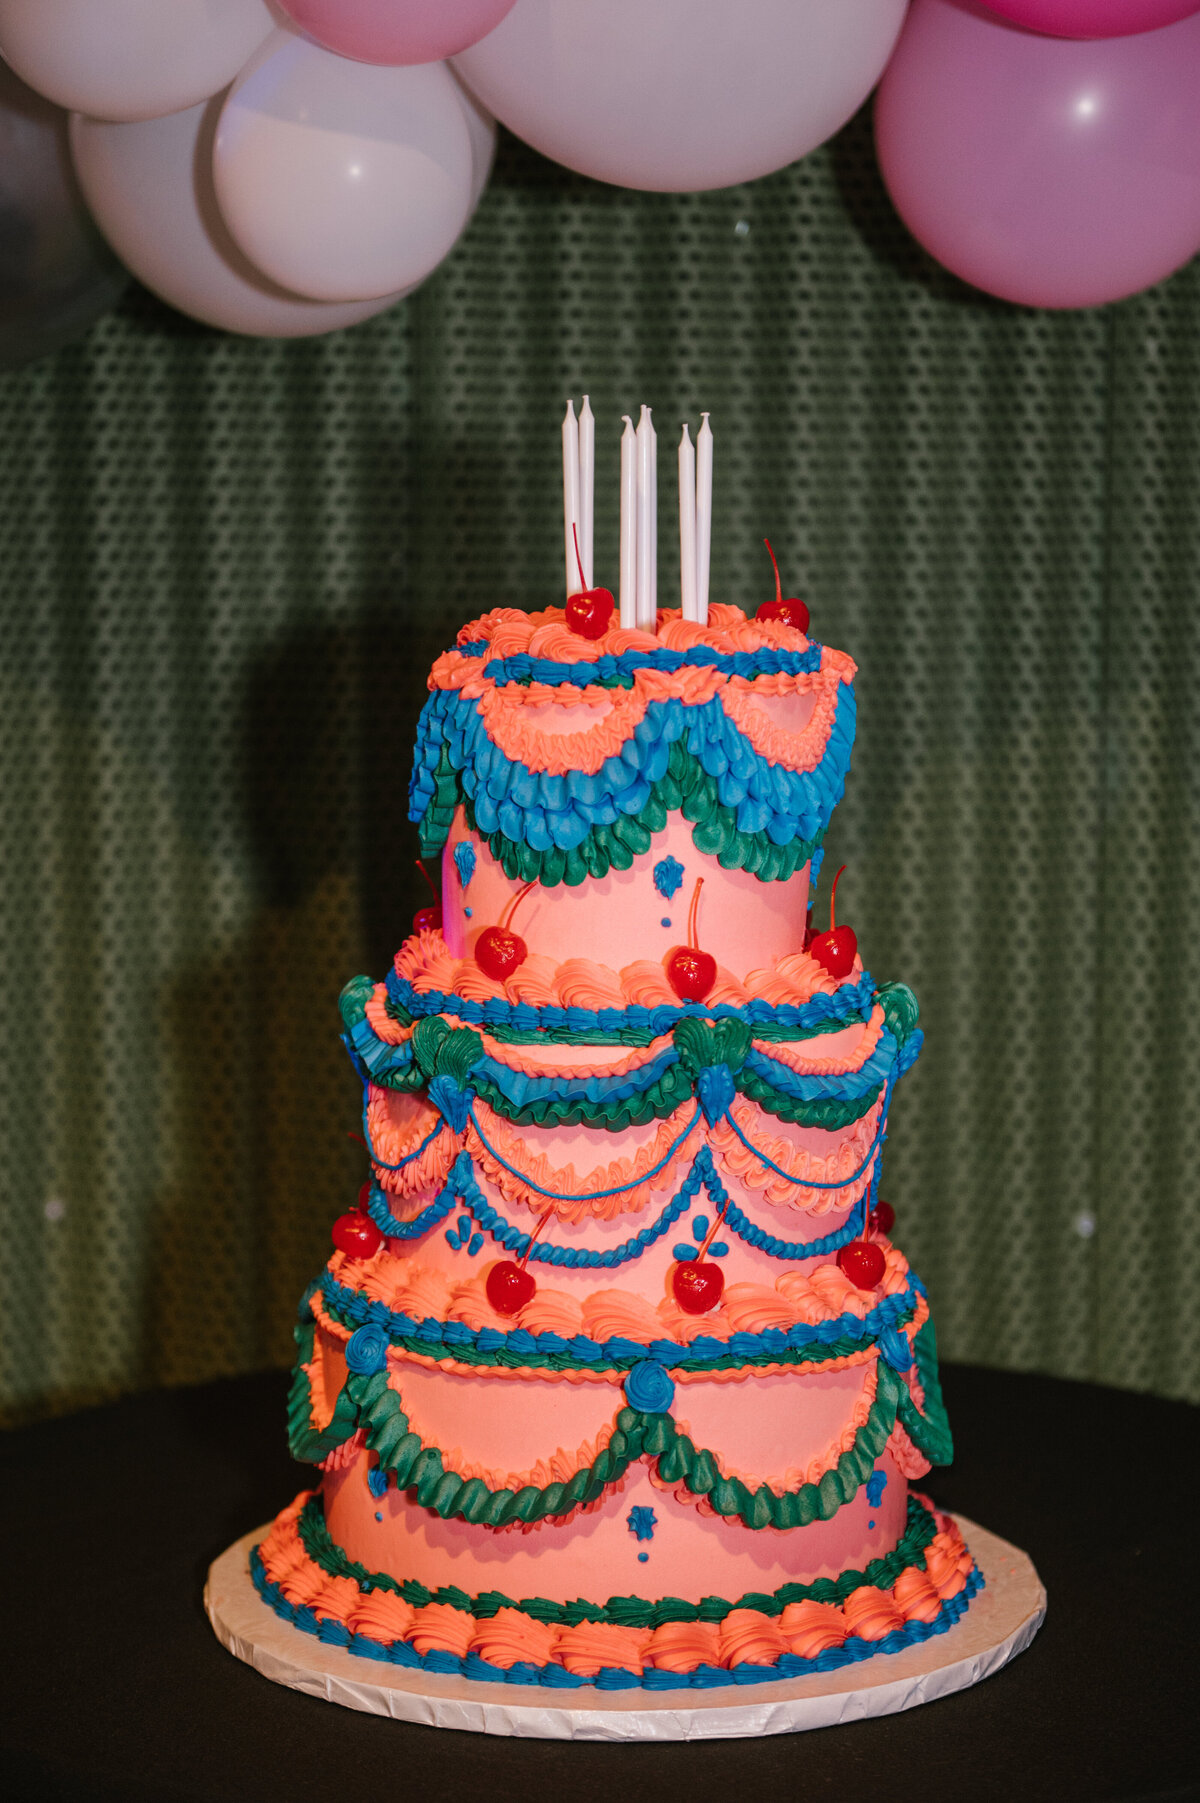 NJ-Event-photography-50th-birthday-party-1394